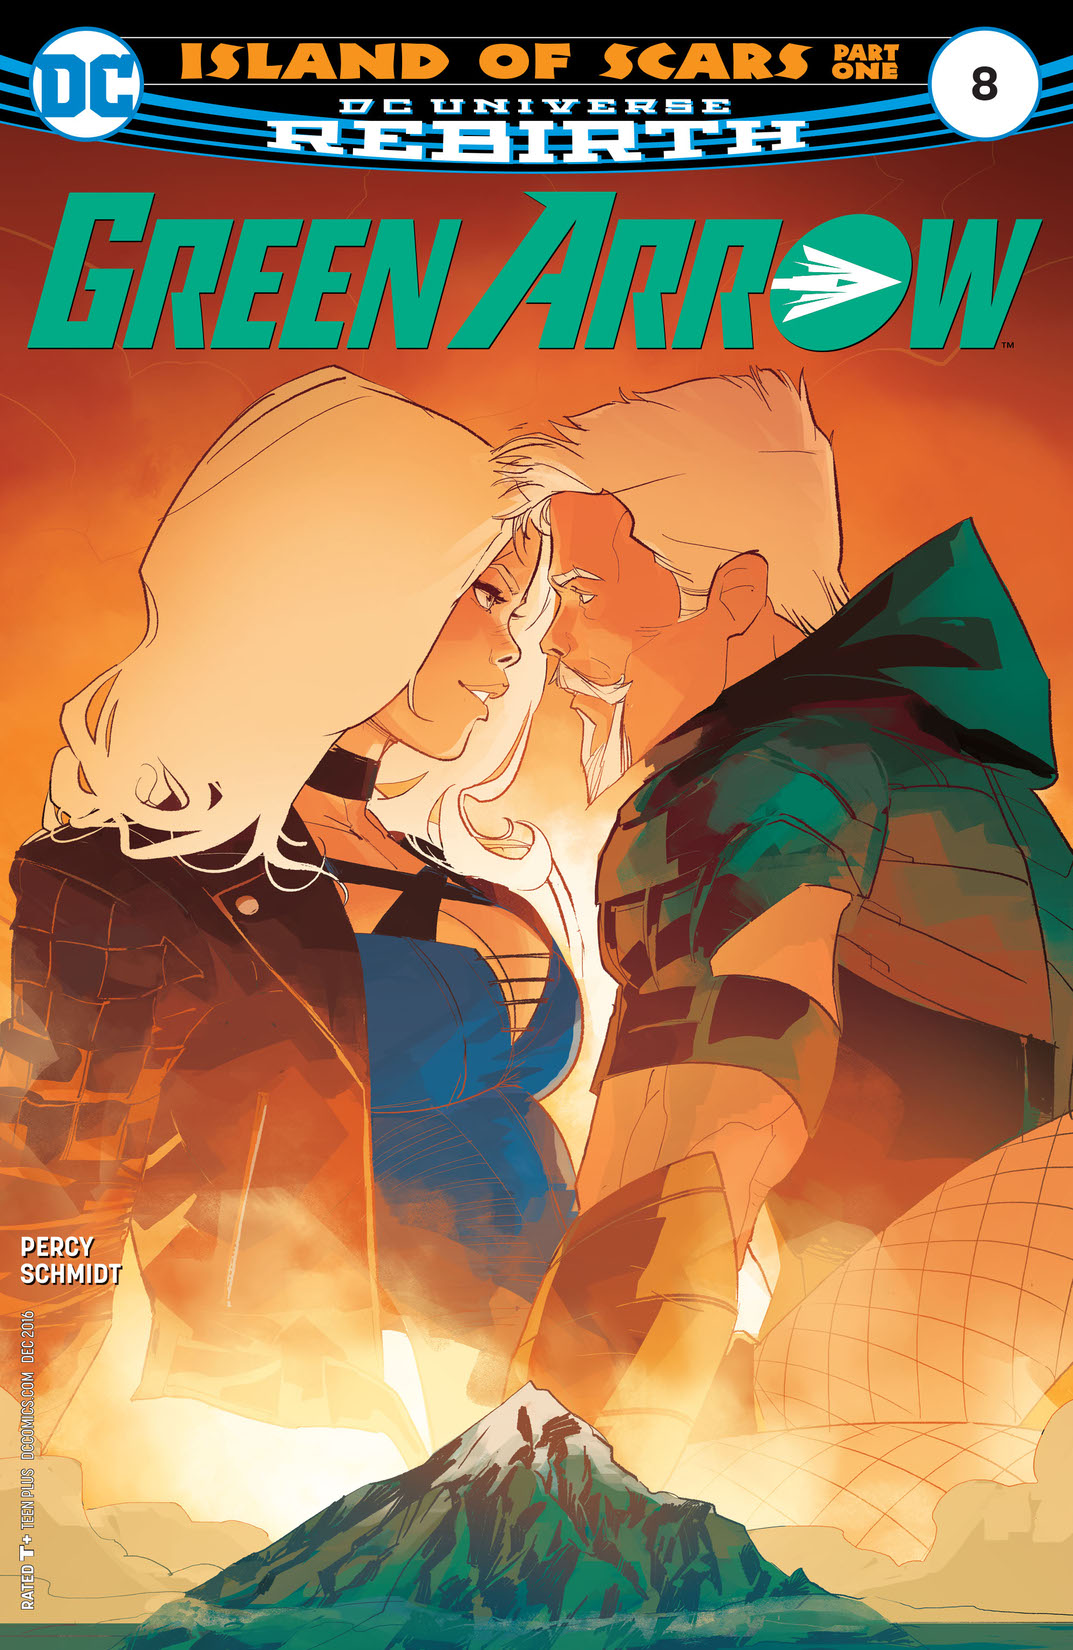 Green Arrow (2016-) #8 preview images